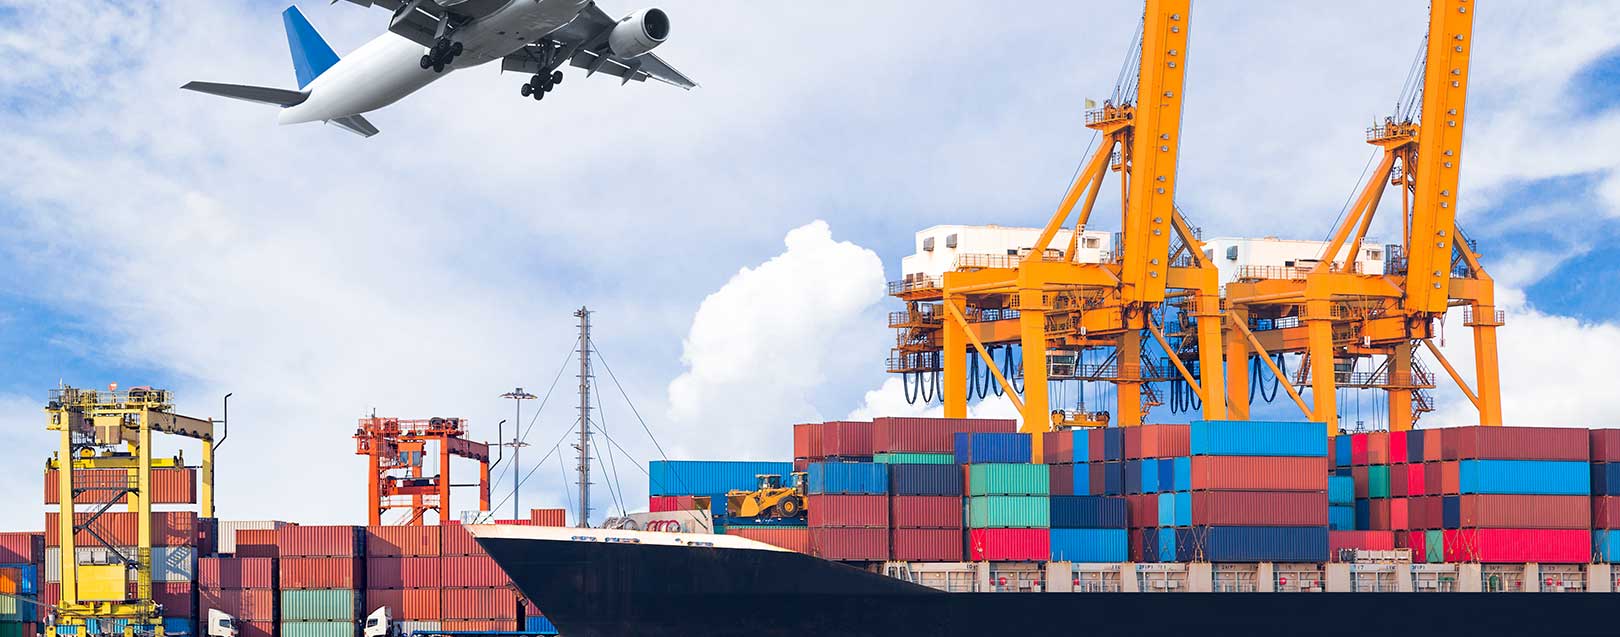 India’s exports up by 9%, imports by 26%, trade gap widens to $16.3 bn in Jan